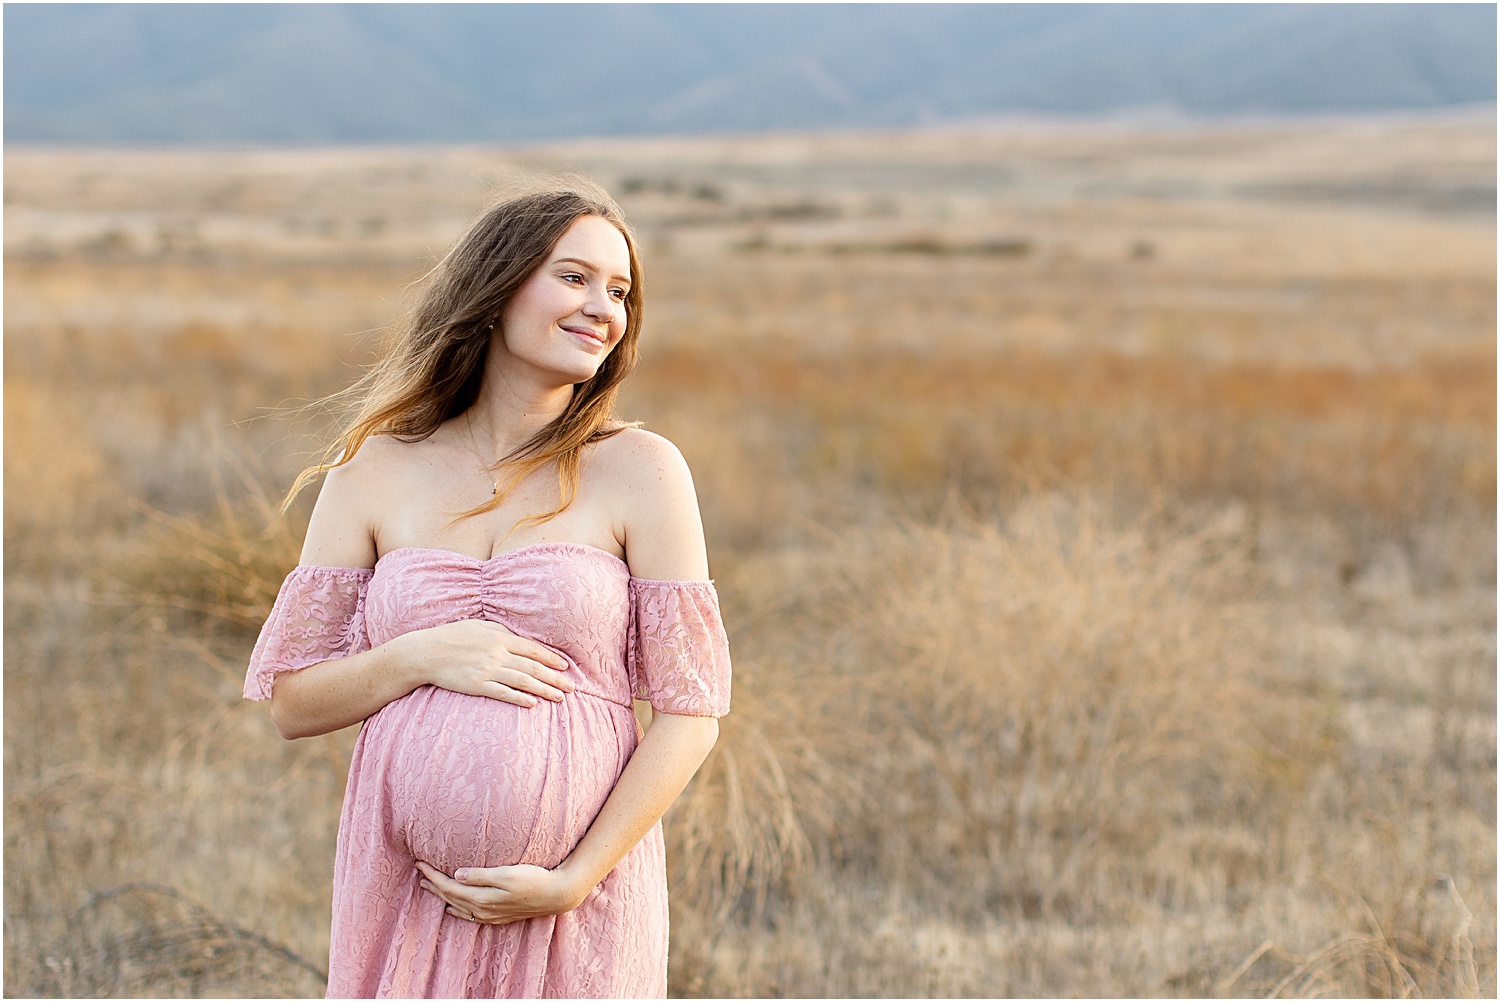 Maternity Photo Session Tips | Maternity photos, mommy-to-be in pink lace maxi dress posing in open field 